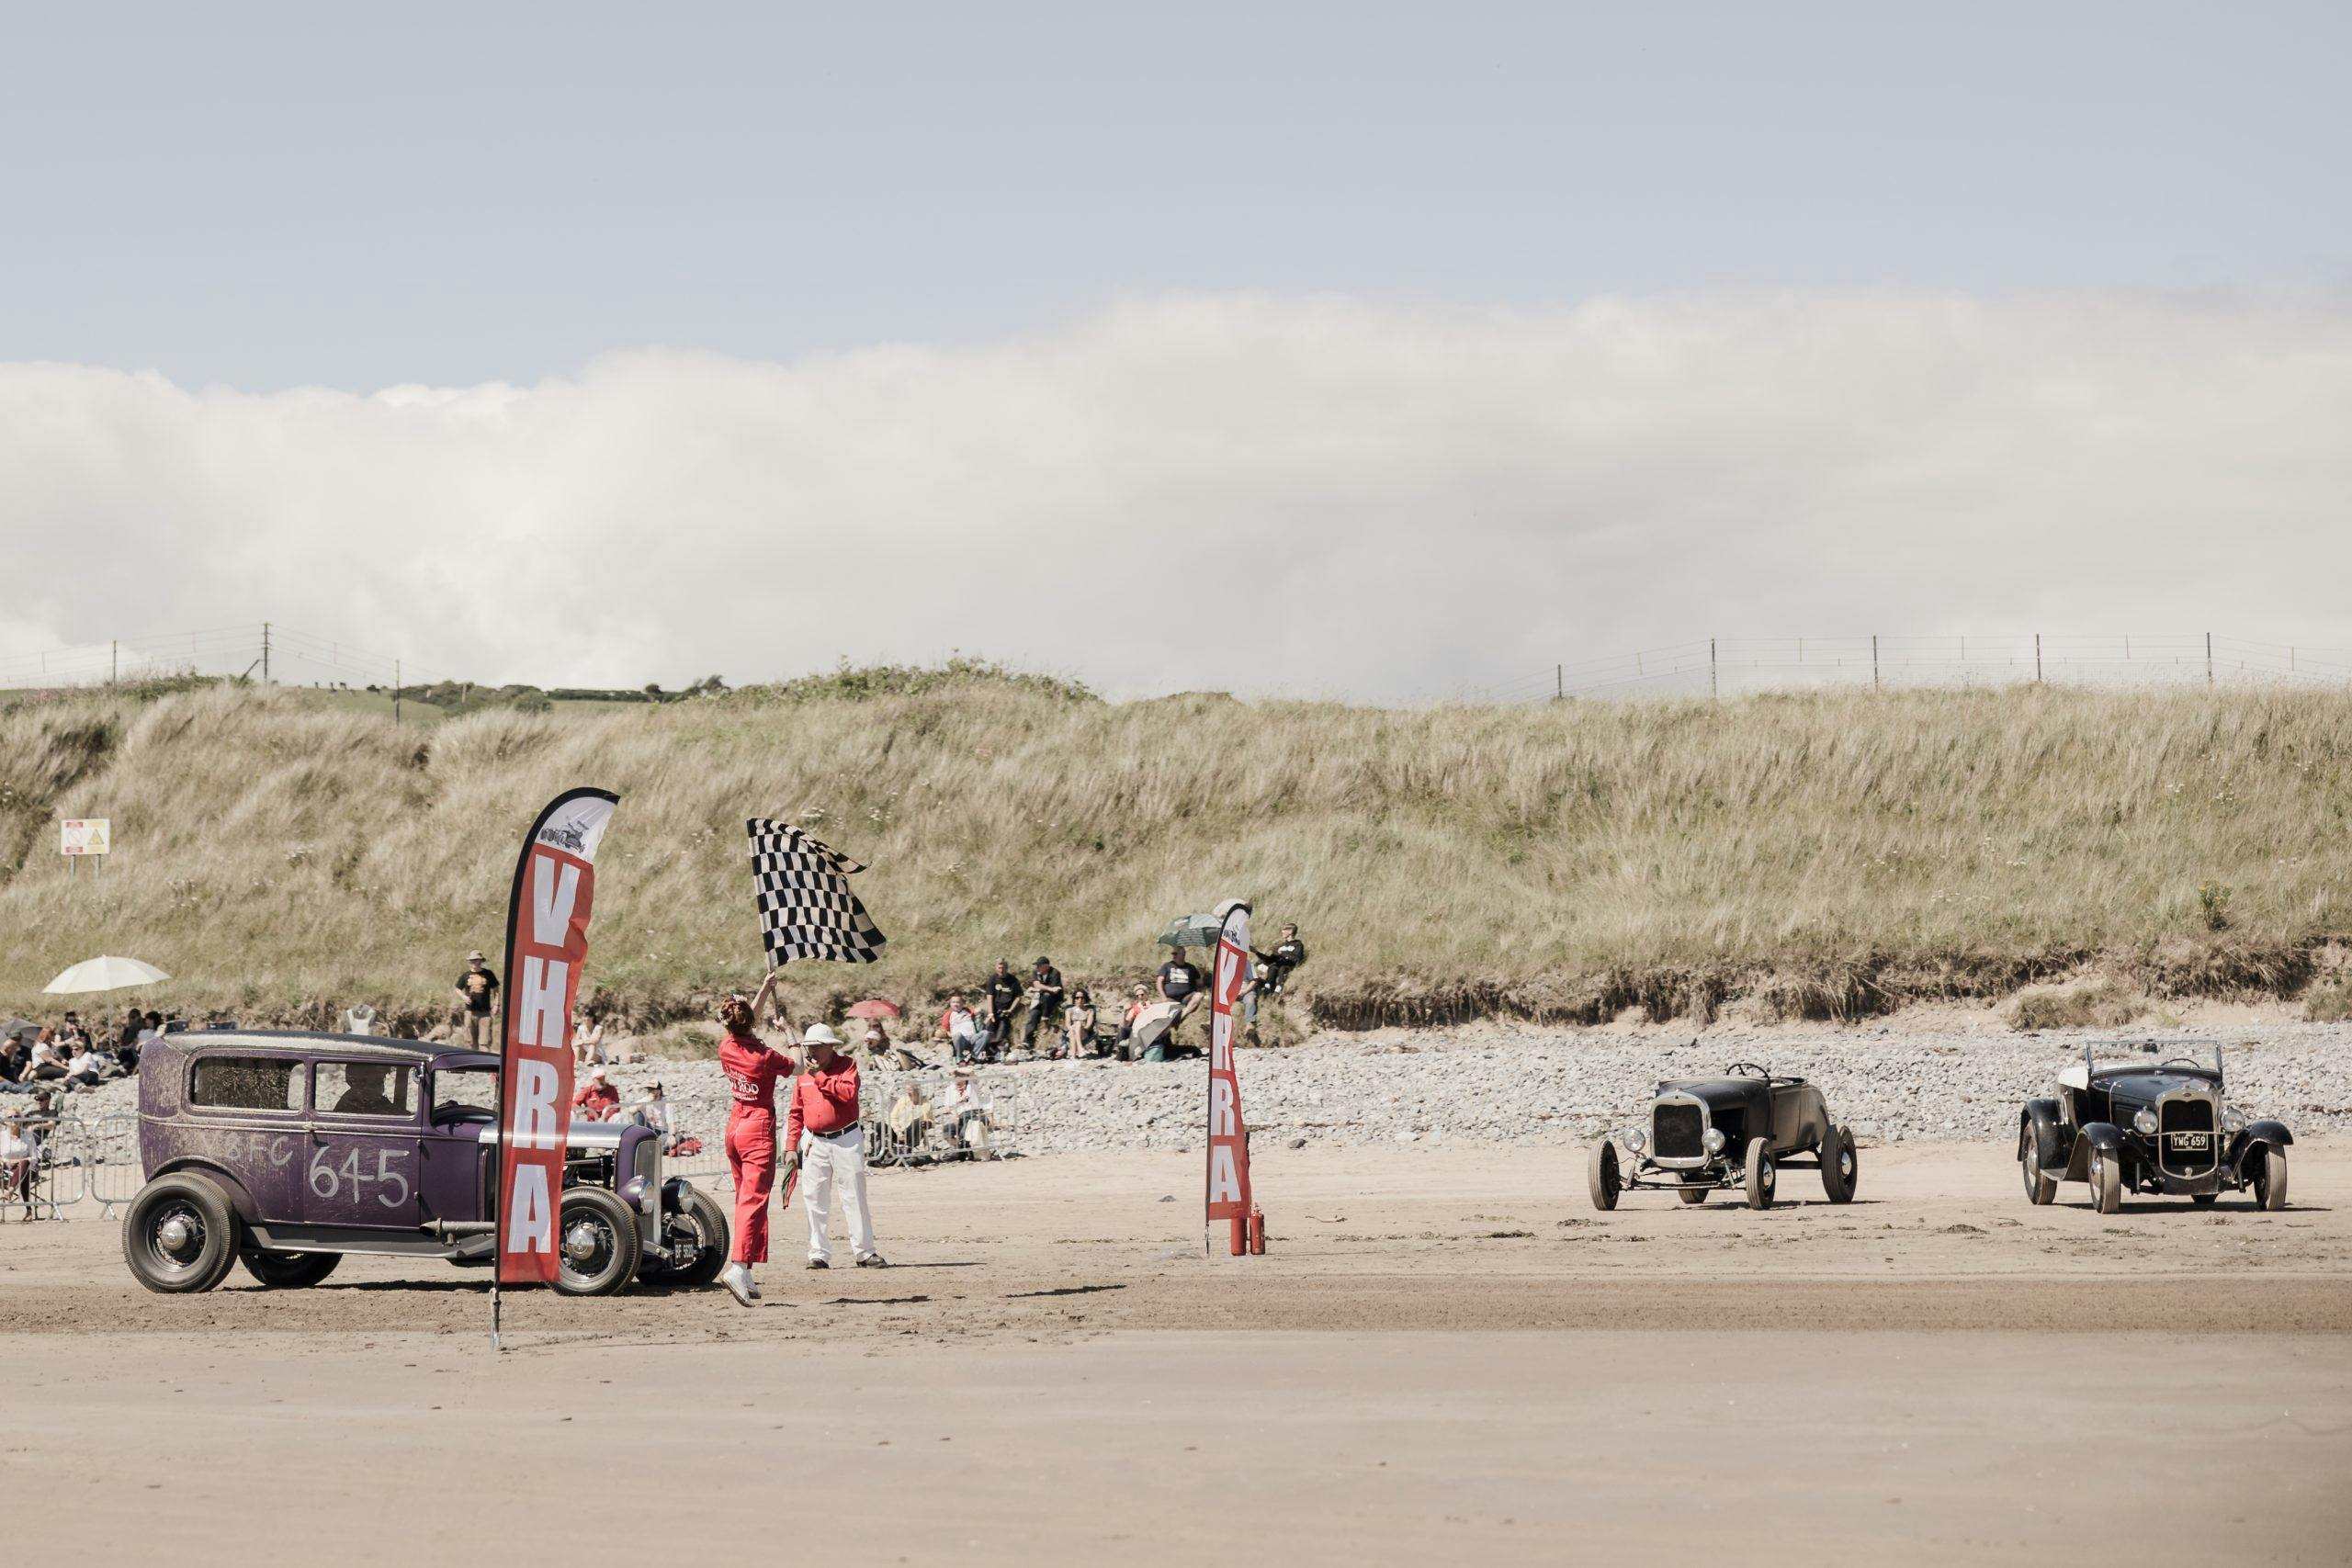 Pendine Sands checkered flag drop wide